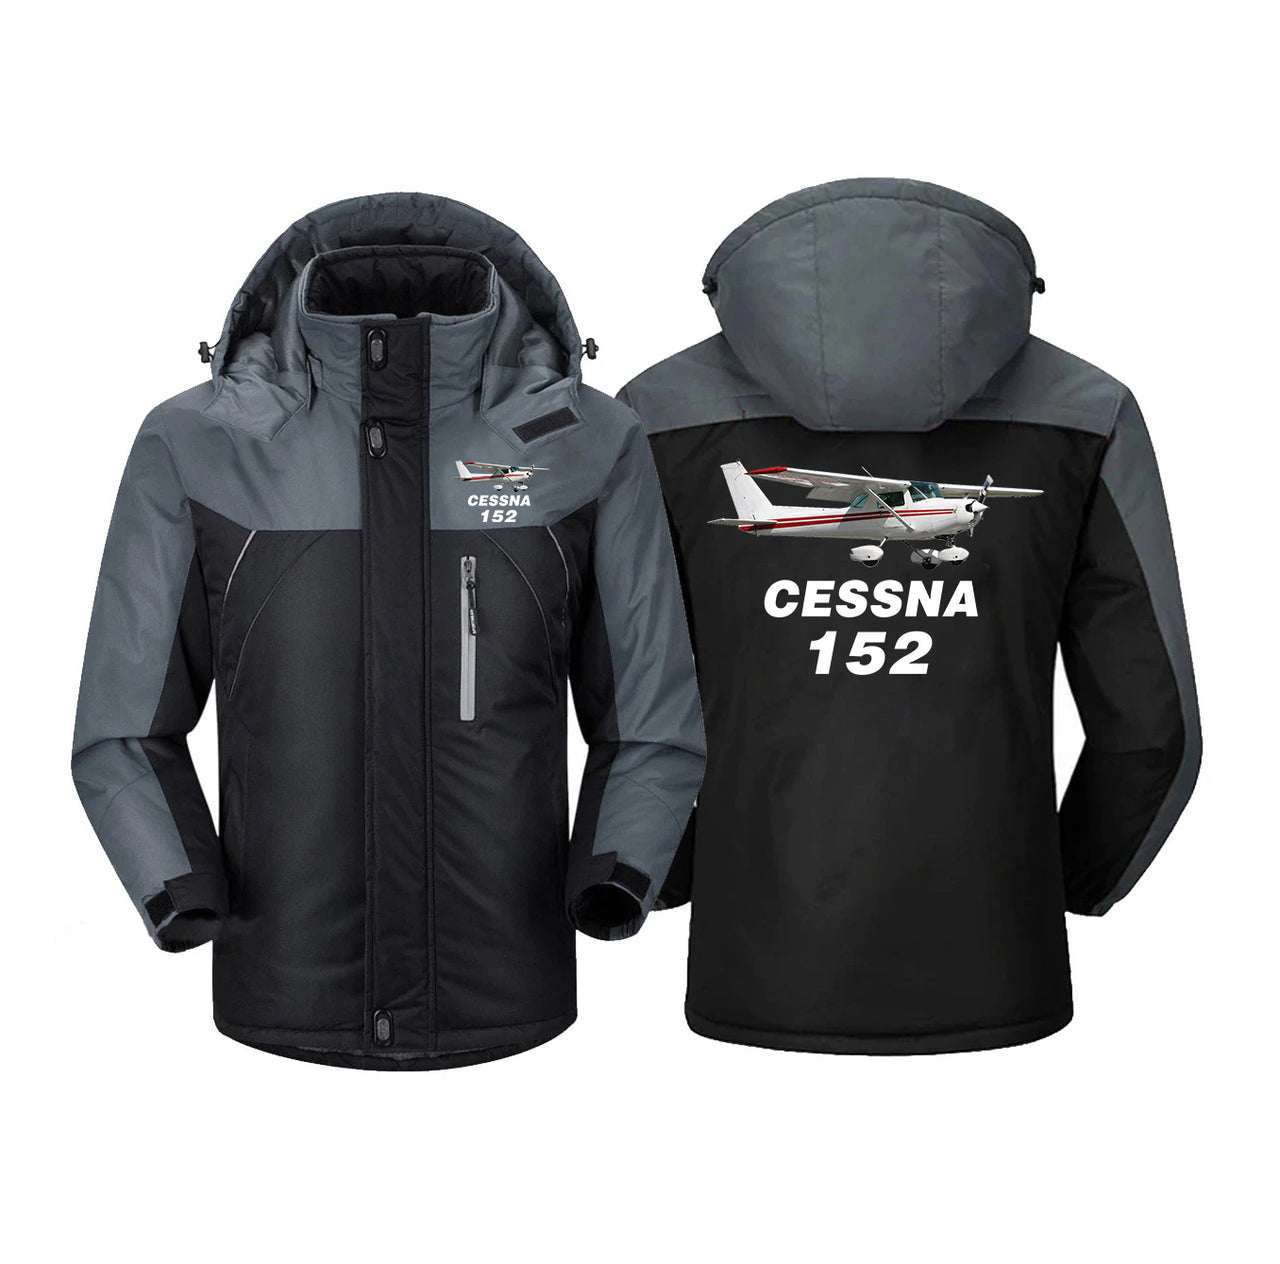 The Cessna 152 Designed Thick Winter Jackets